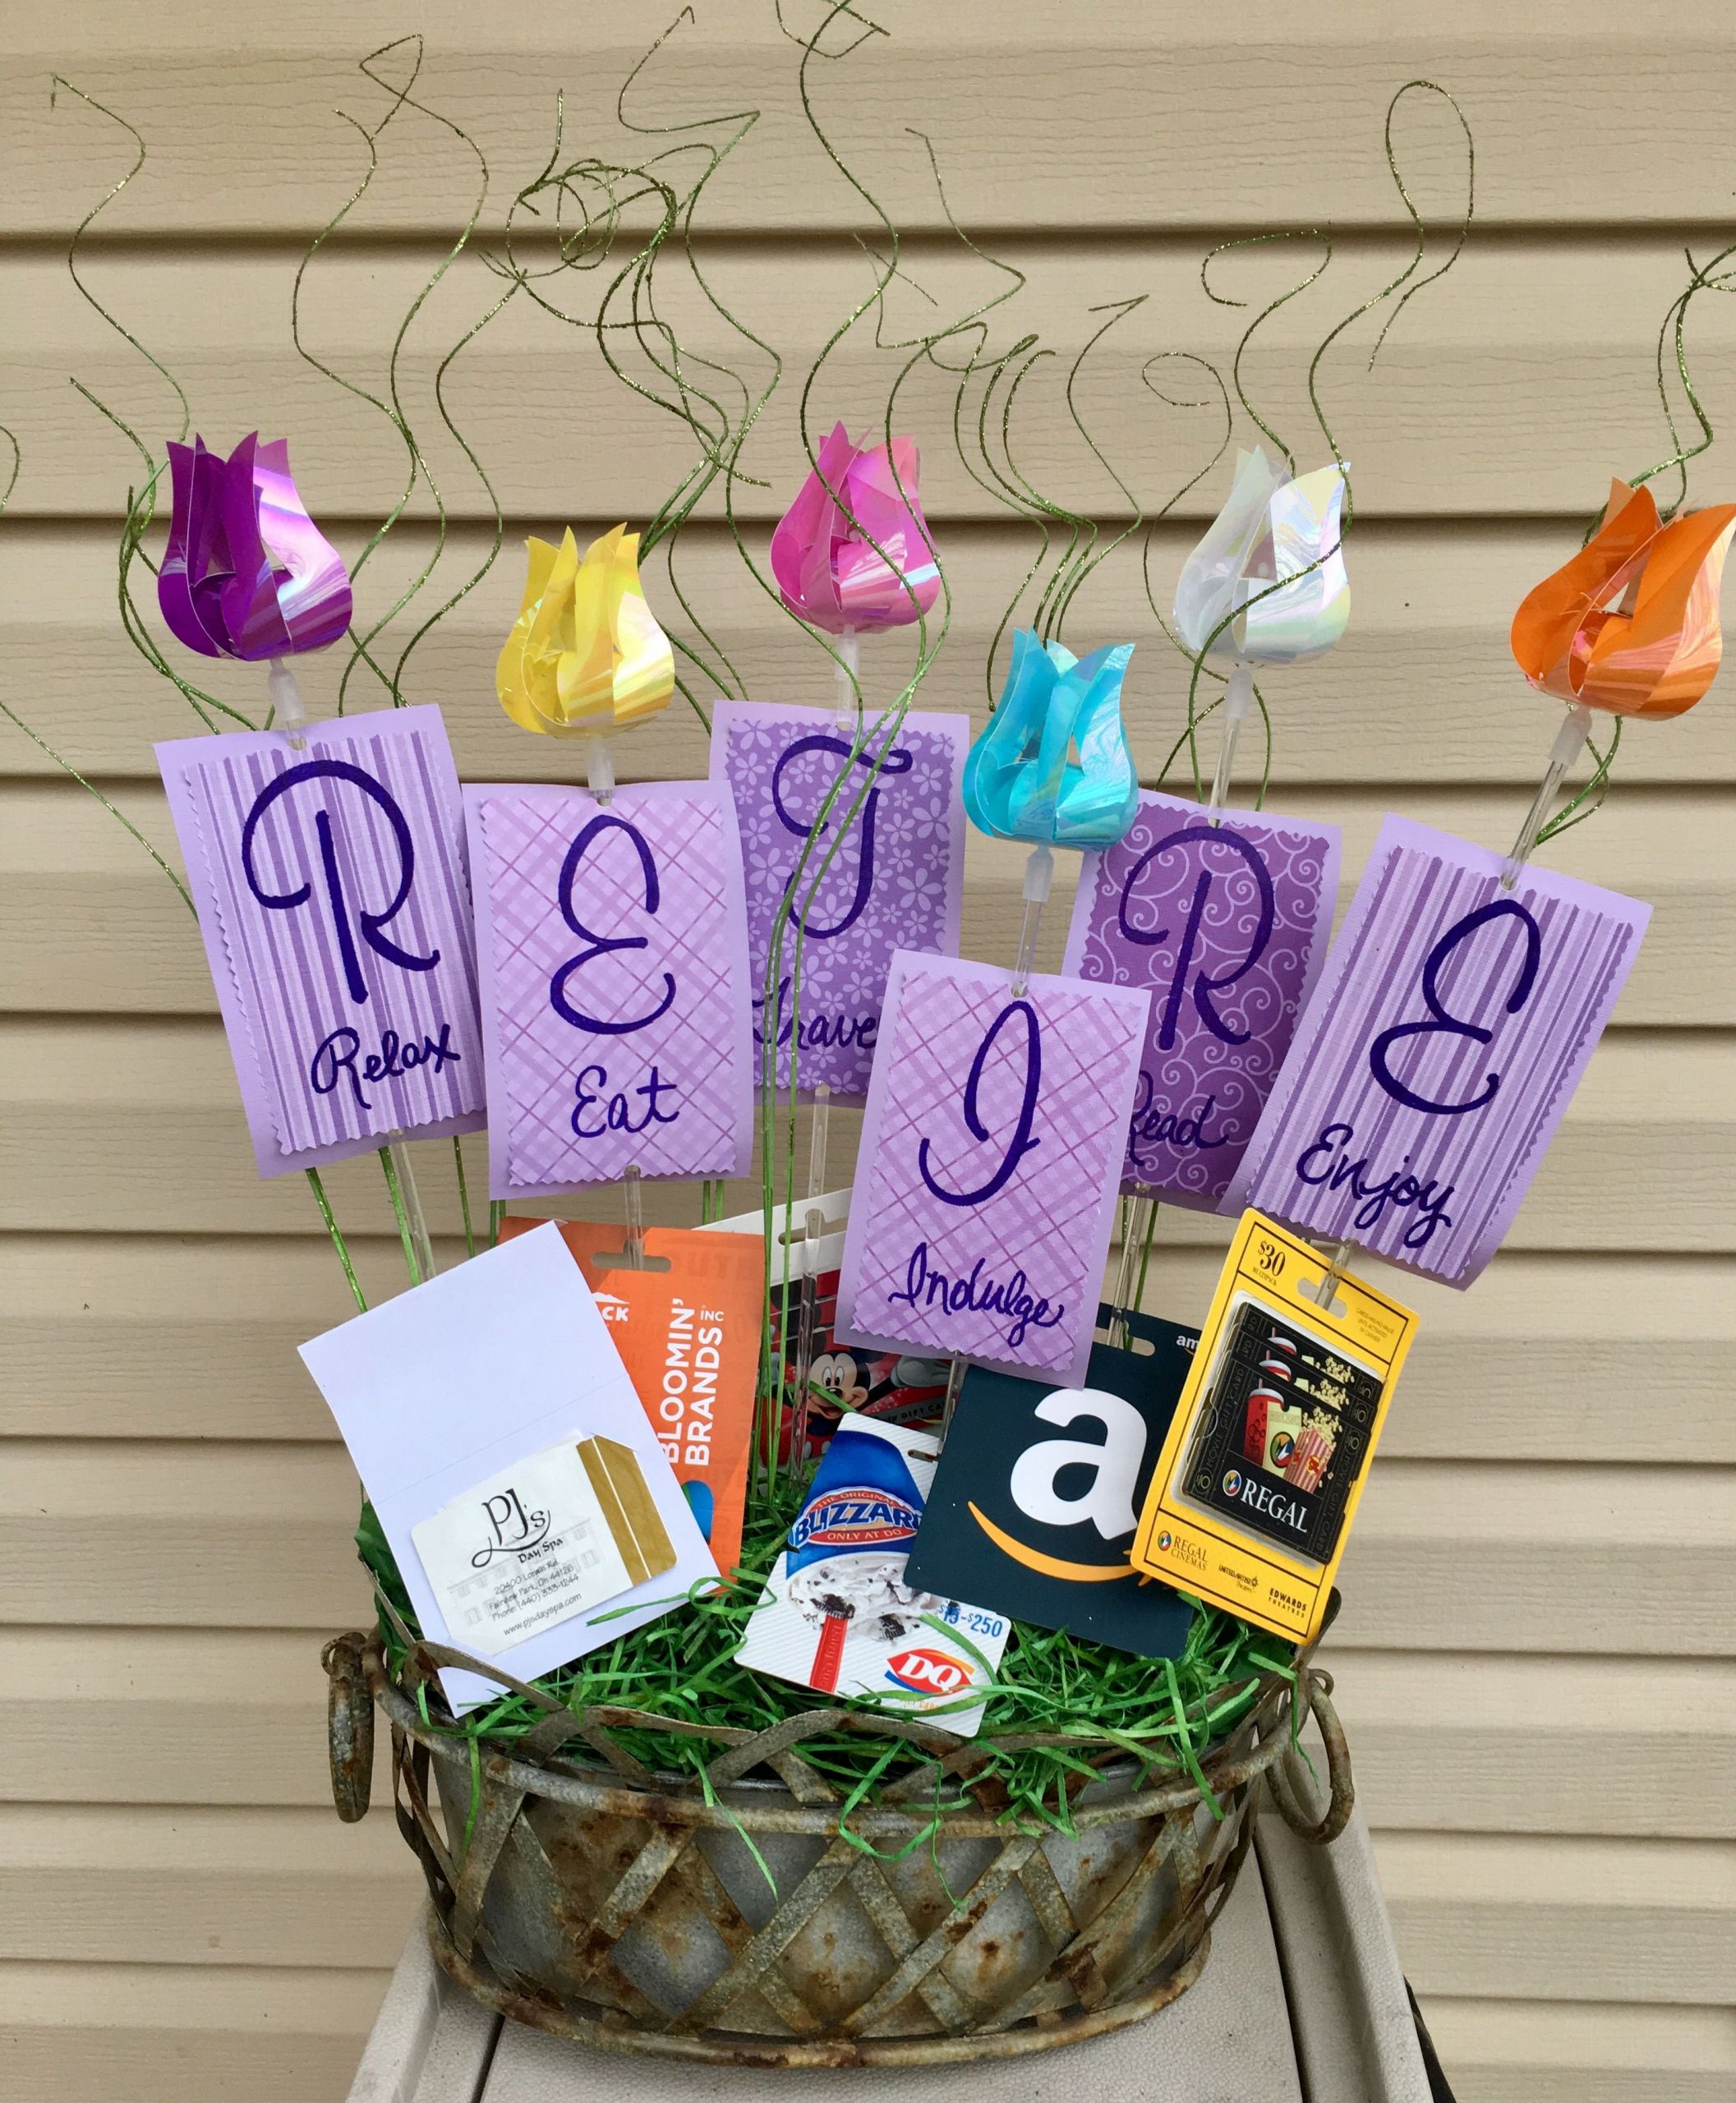 Retirement Party Ideas For Coworker
 Retirement t basket with t cards Relax Eat Travel